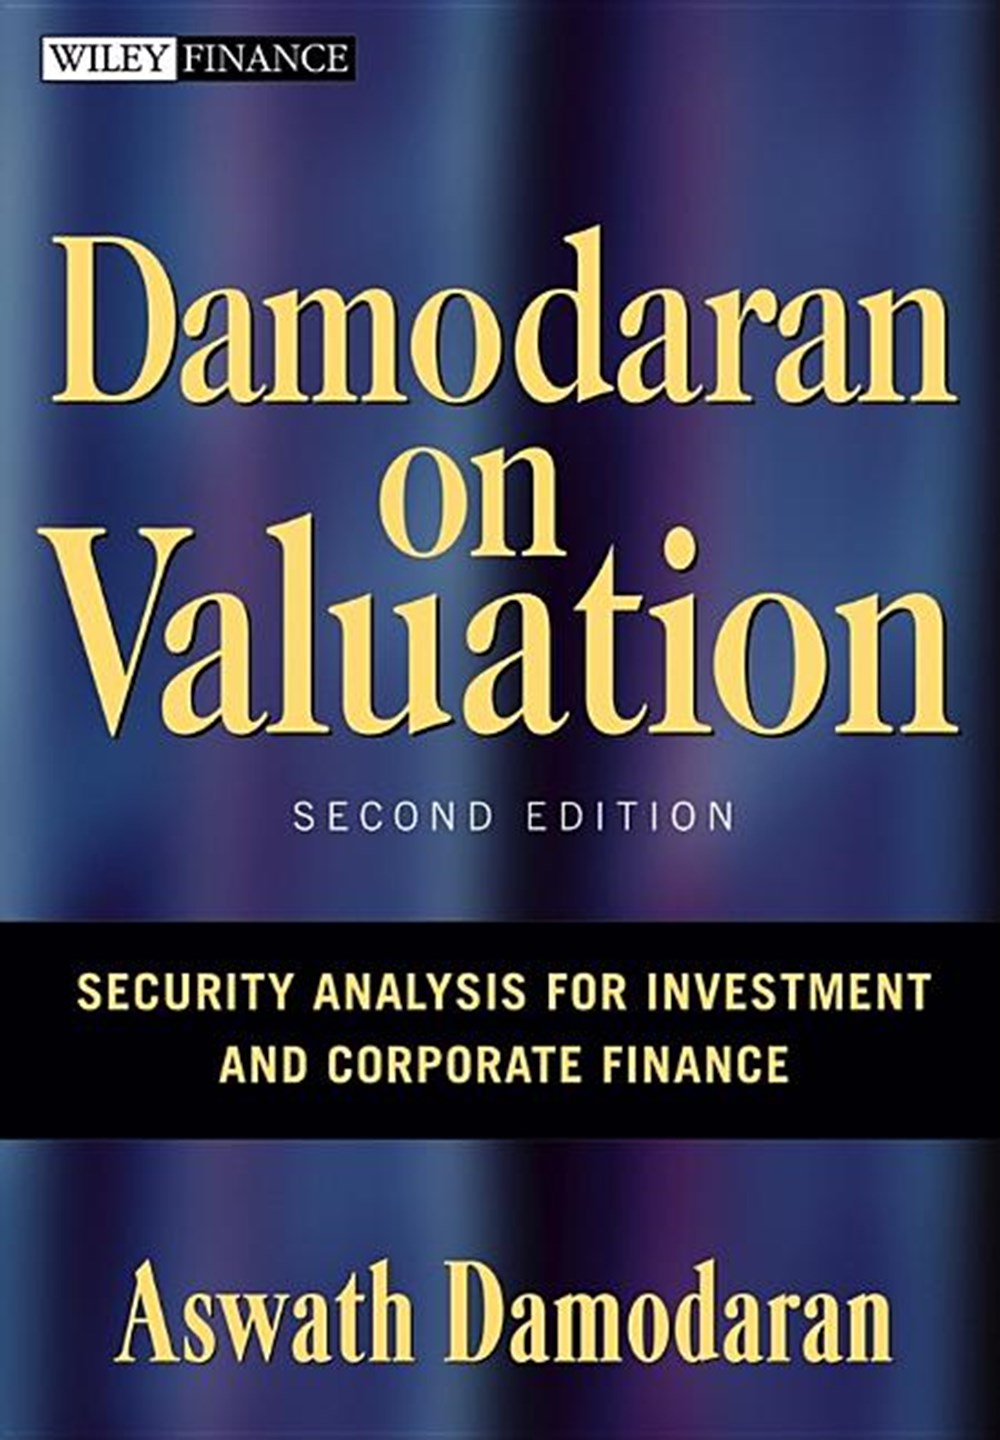 Damodaran on Valuation Security Analysis for Investment and Corporate Finance